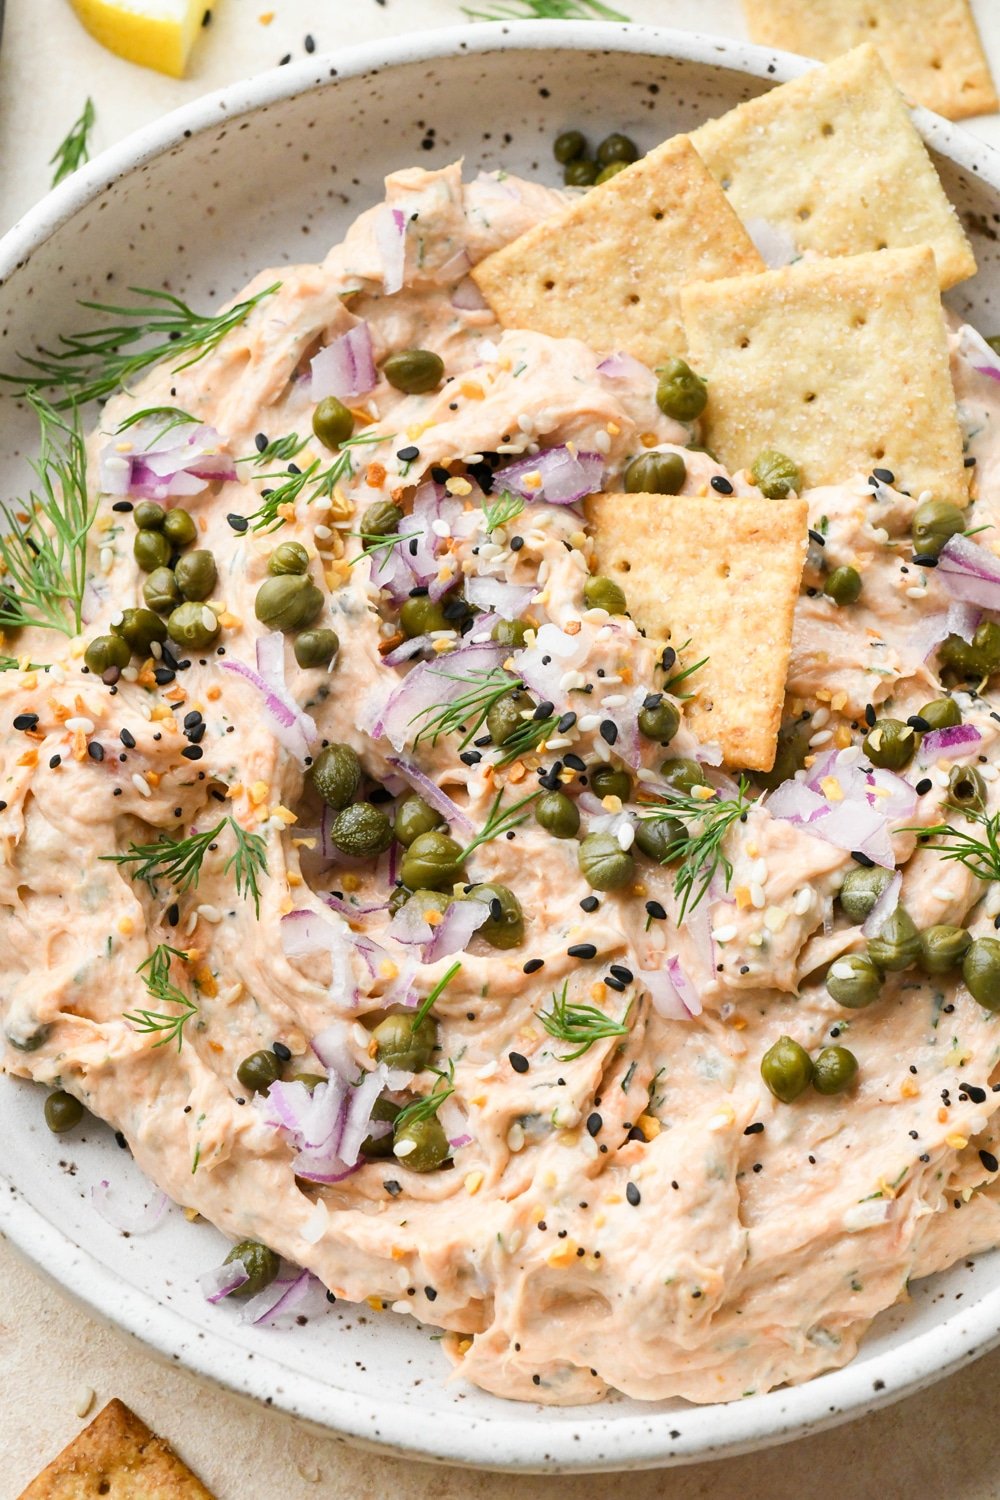 Dairy free smokes salmon dip in a small shallow ceramic speckled bowl, garnished with capers, fresh dill, everything but the bagel seasoning, and square gluten free crackers tucked into the dip.